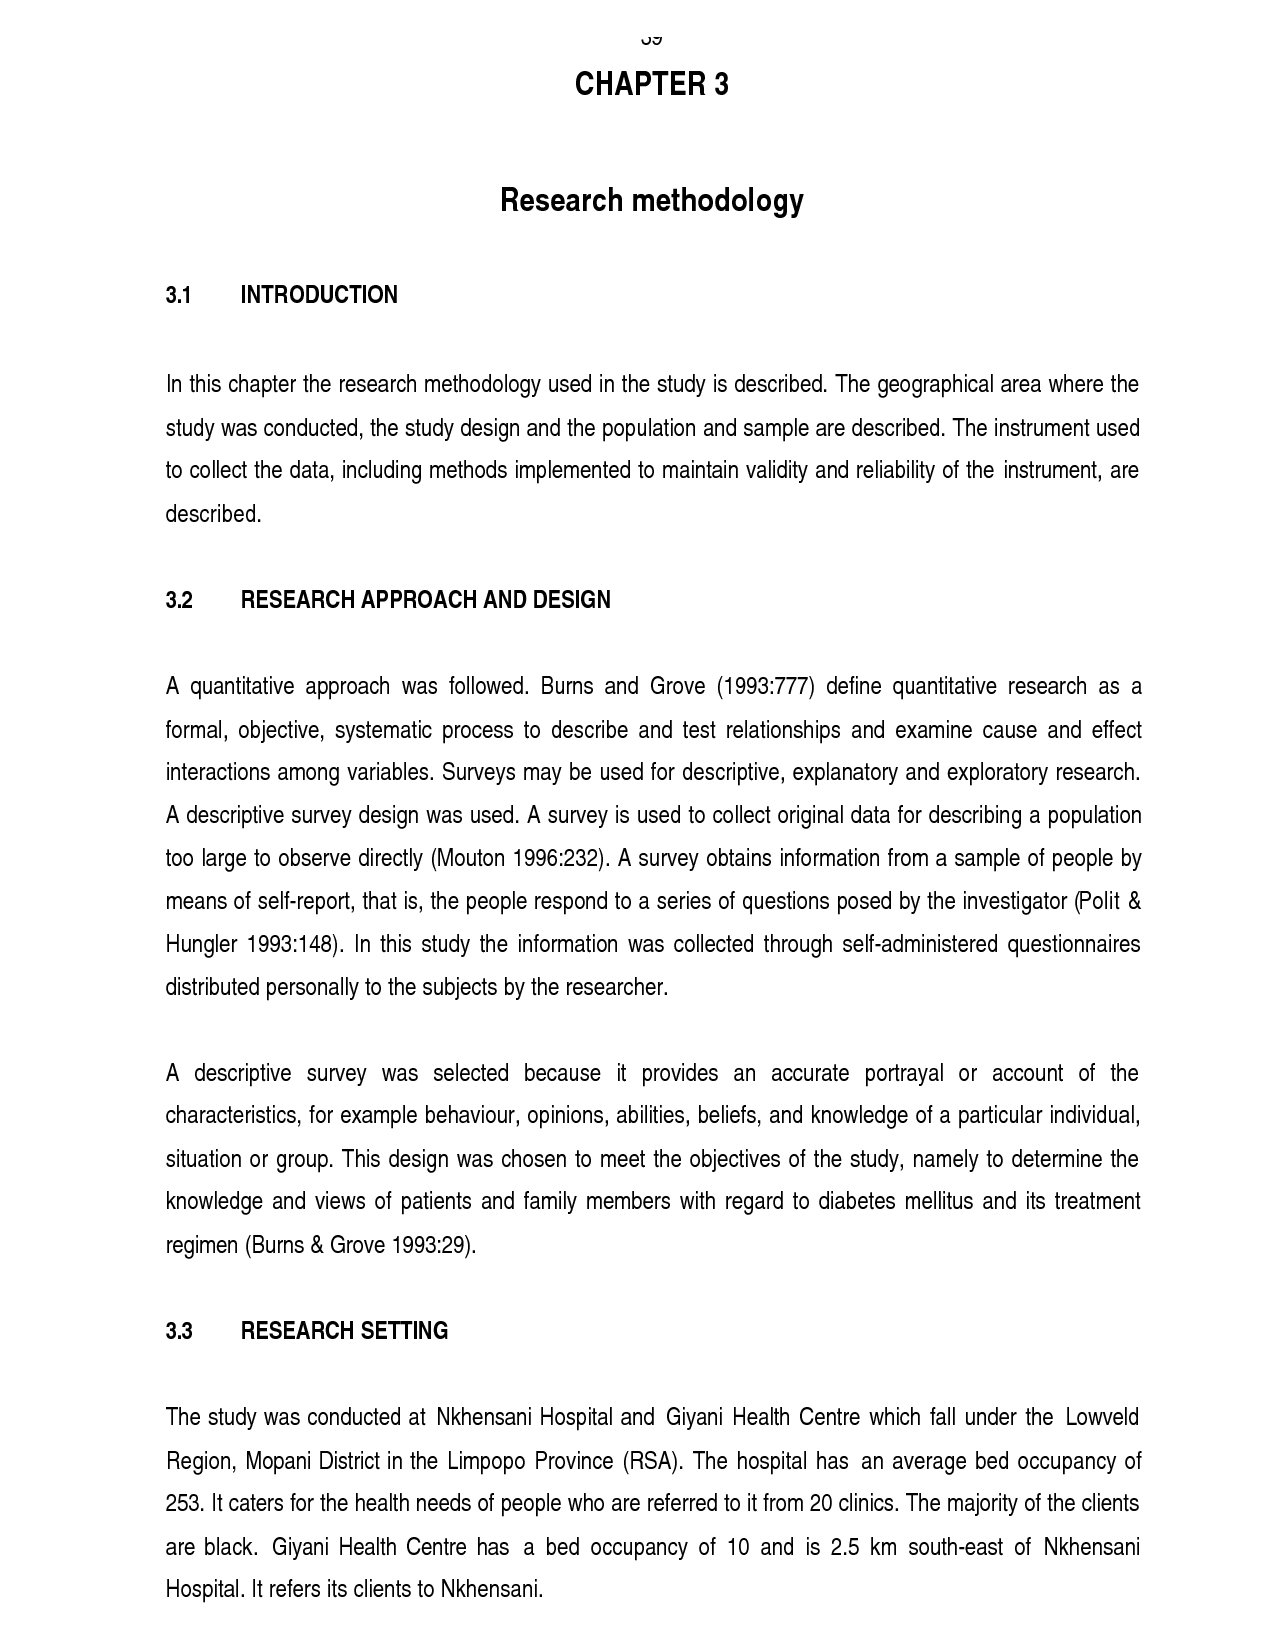 data collection section of research paper example